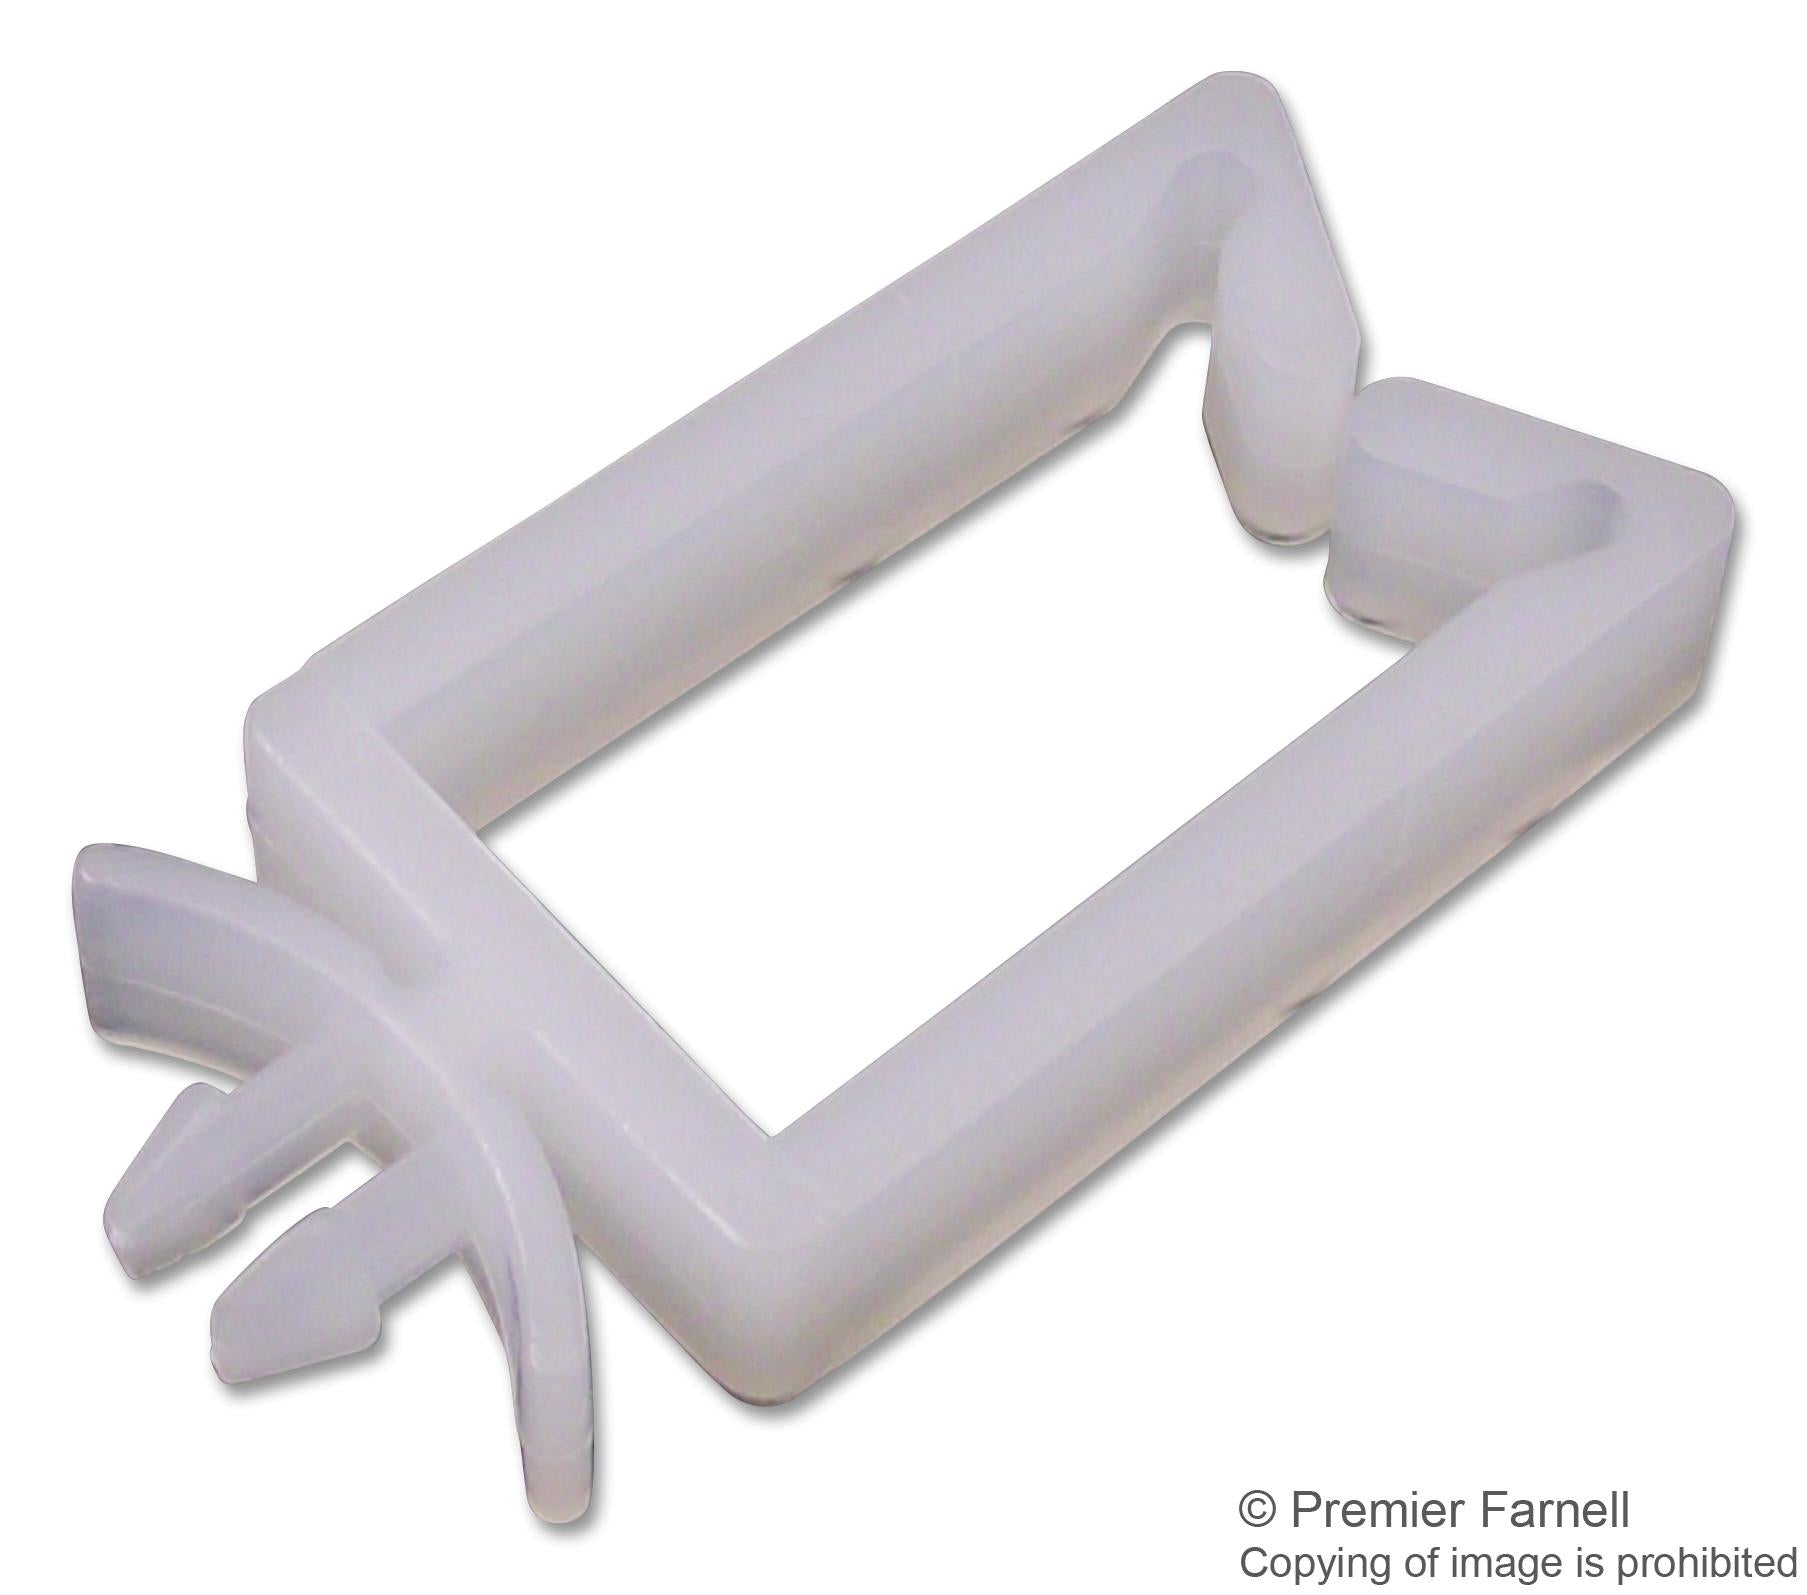 TRWS-A-2-01 CABLE CLAMP, NYLON 6.6, 18MM, PK50 TR FASTENINGS